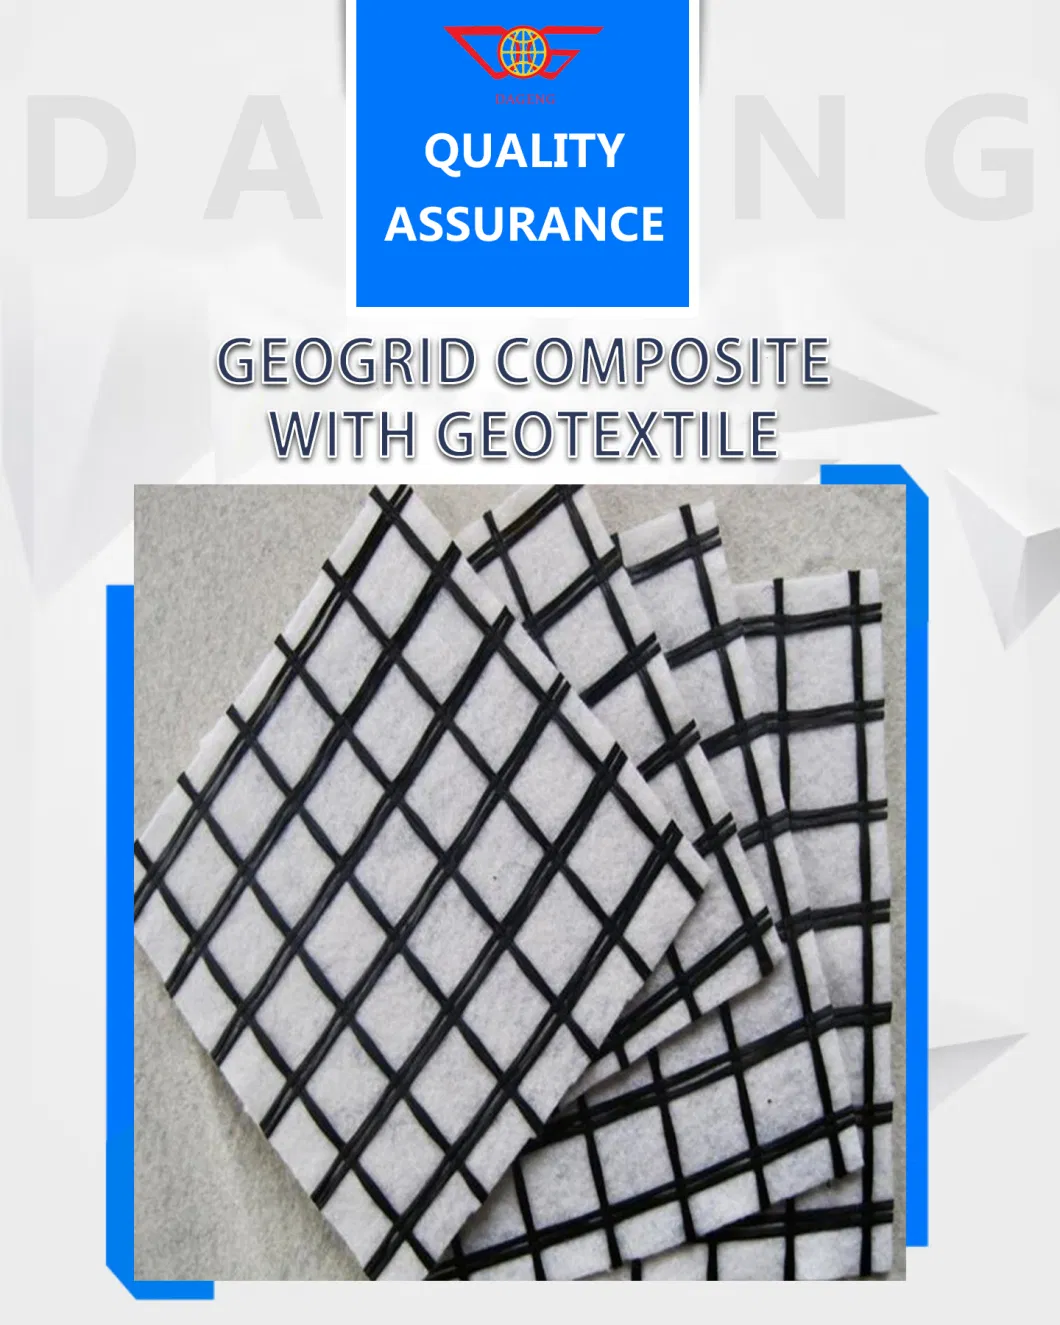 Biaxial Polypropylene Biaxial Geogrid 40kn Composite Geotextile Used Soil Reinforcement and Stabilization Hot Sold